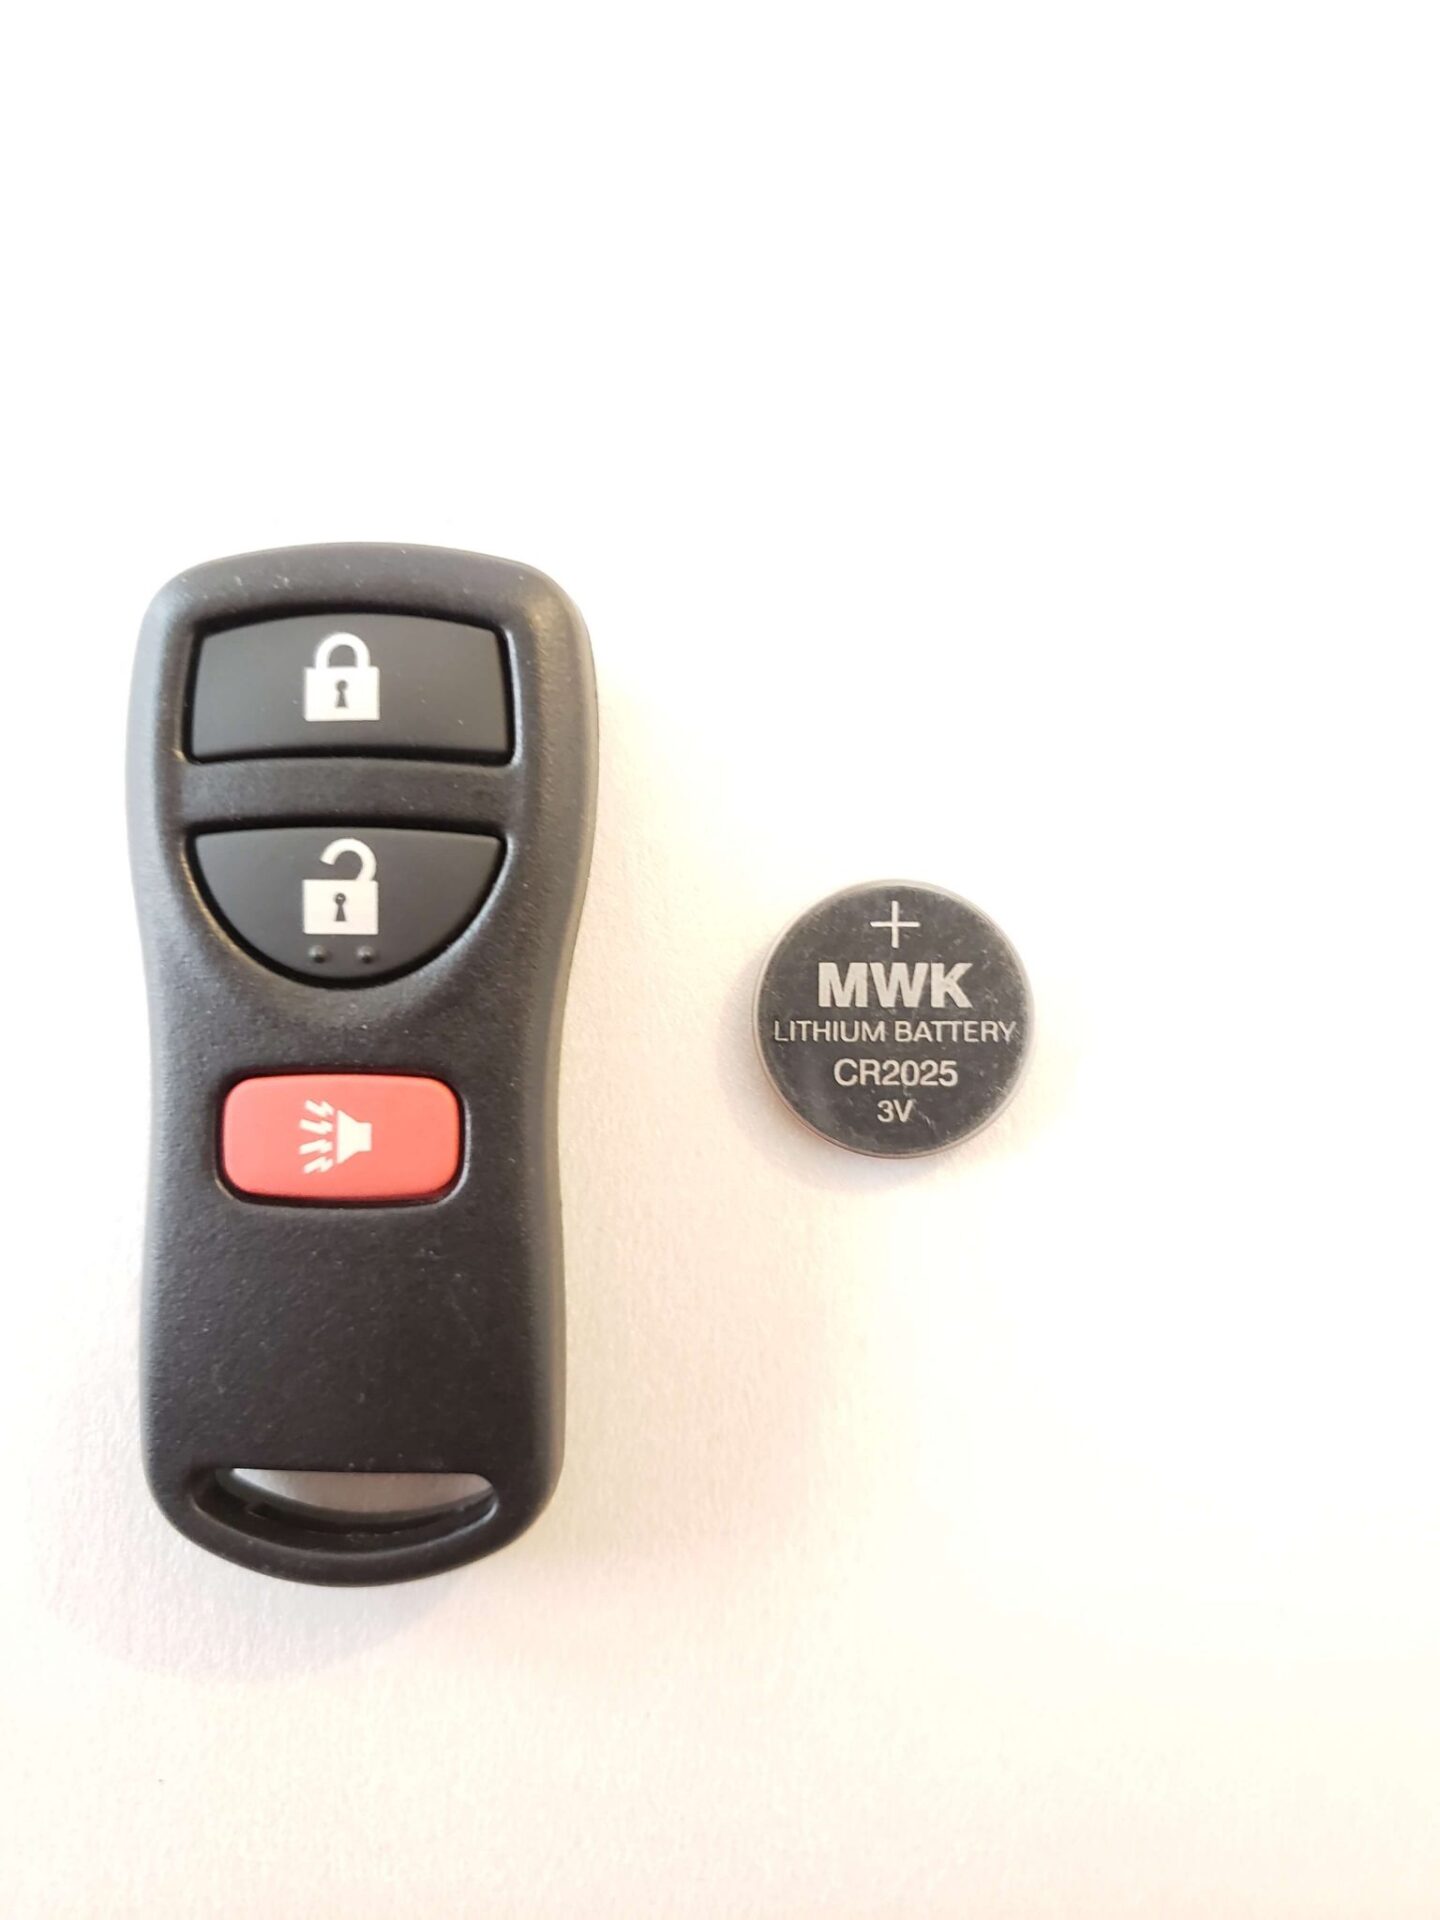 Nissan Versa Replacement Keys What To Do, Options, Cost & More